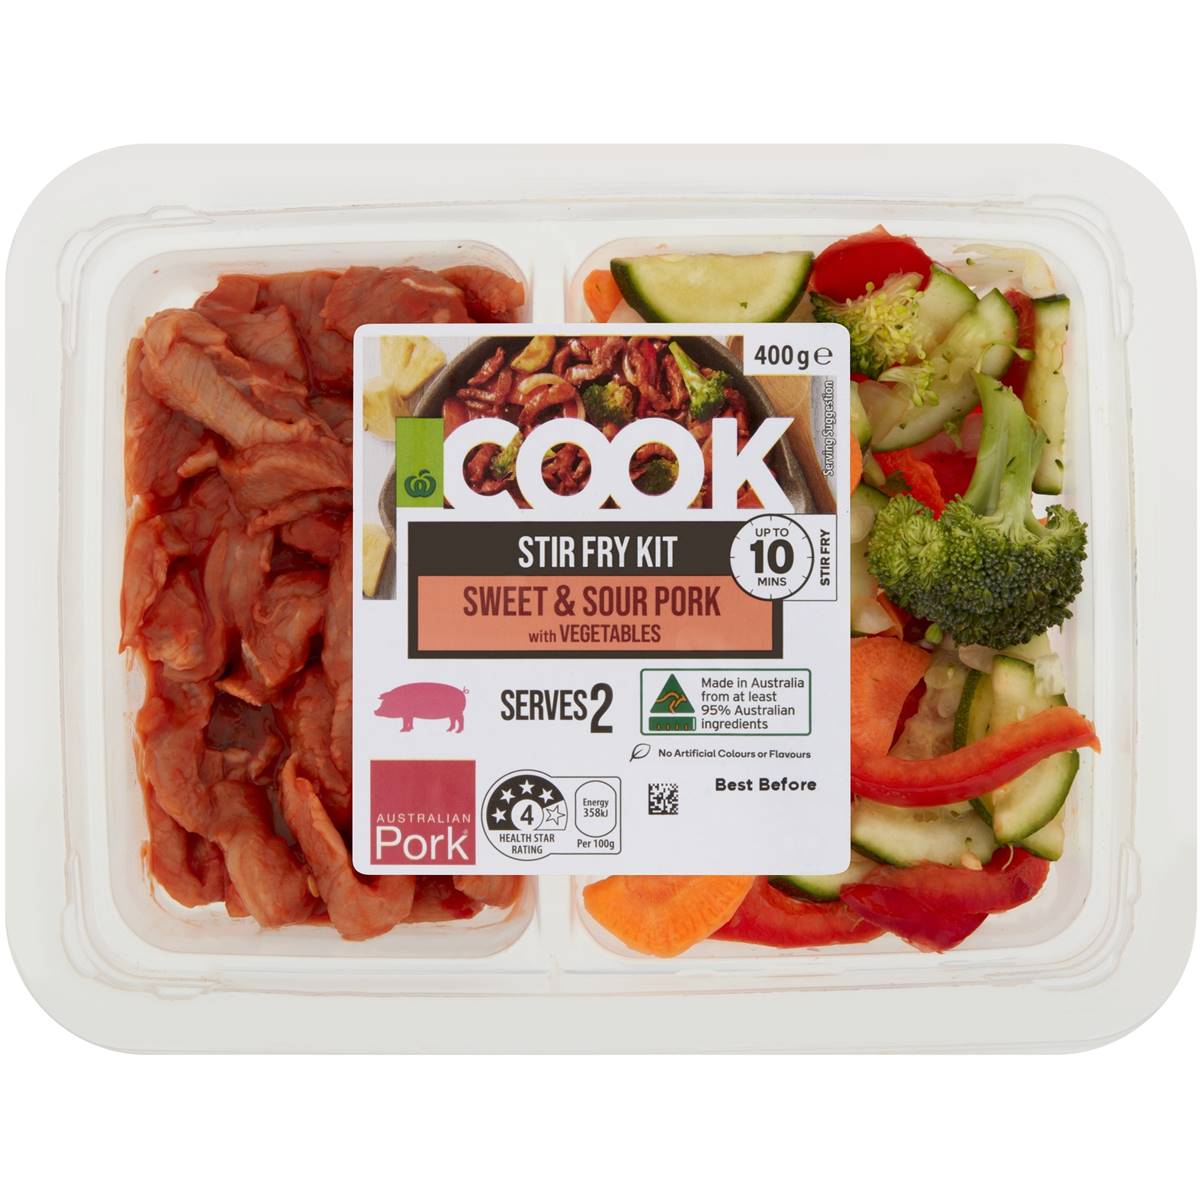 Calories in Woolworths Cook Stir Fry Kit Sweet & Sour Pork With Vegetables